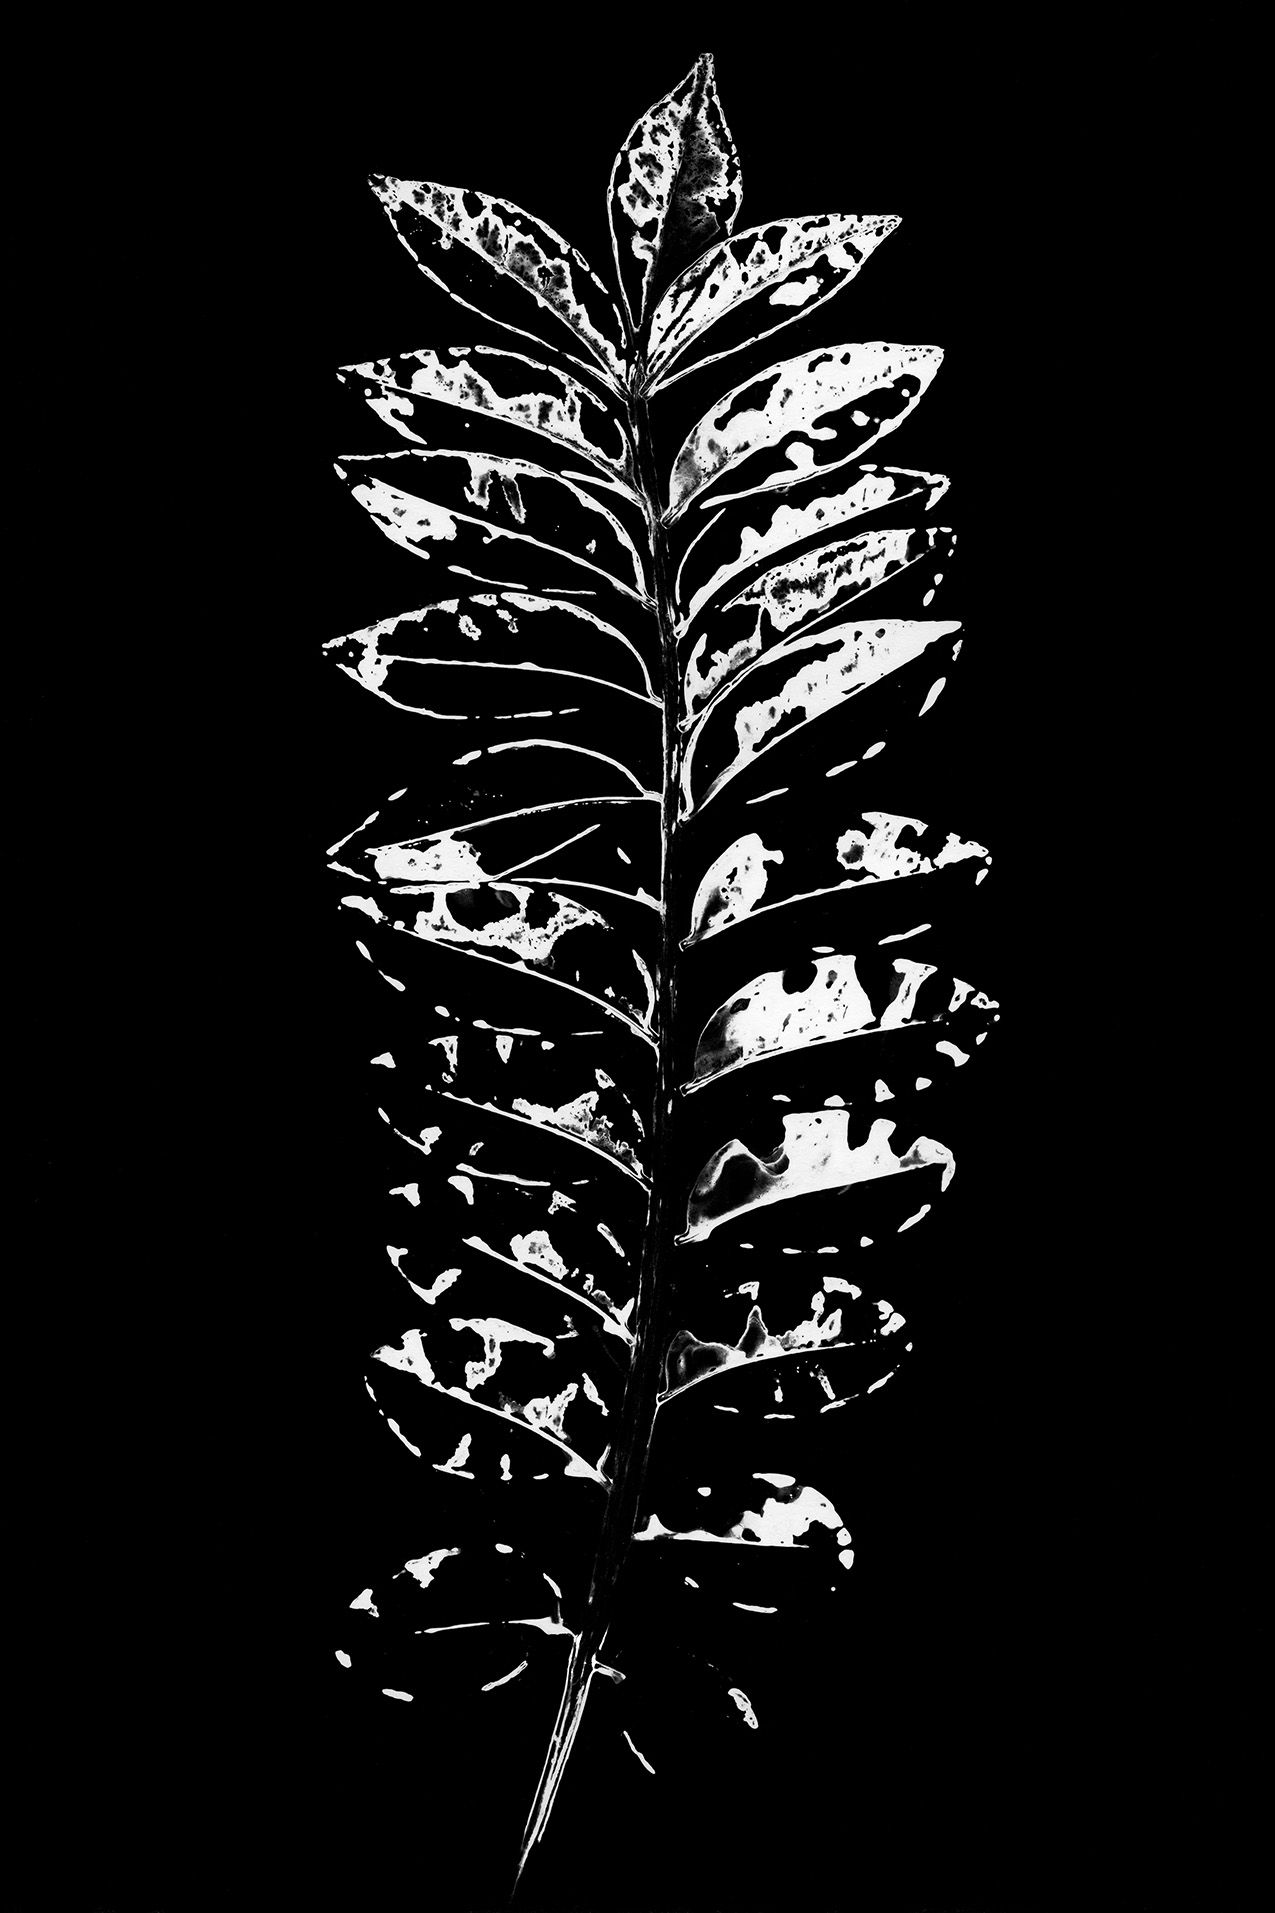 black and white photogram of a stem with alternating elliptical leaves